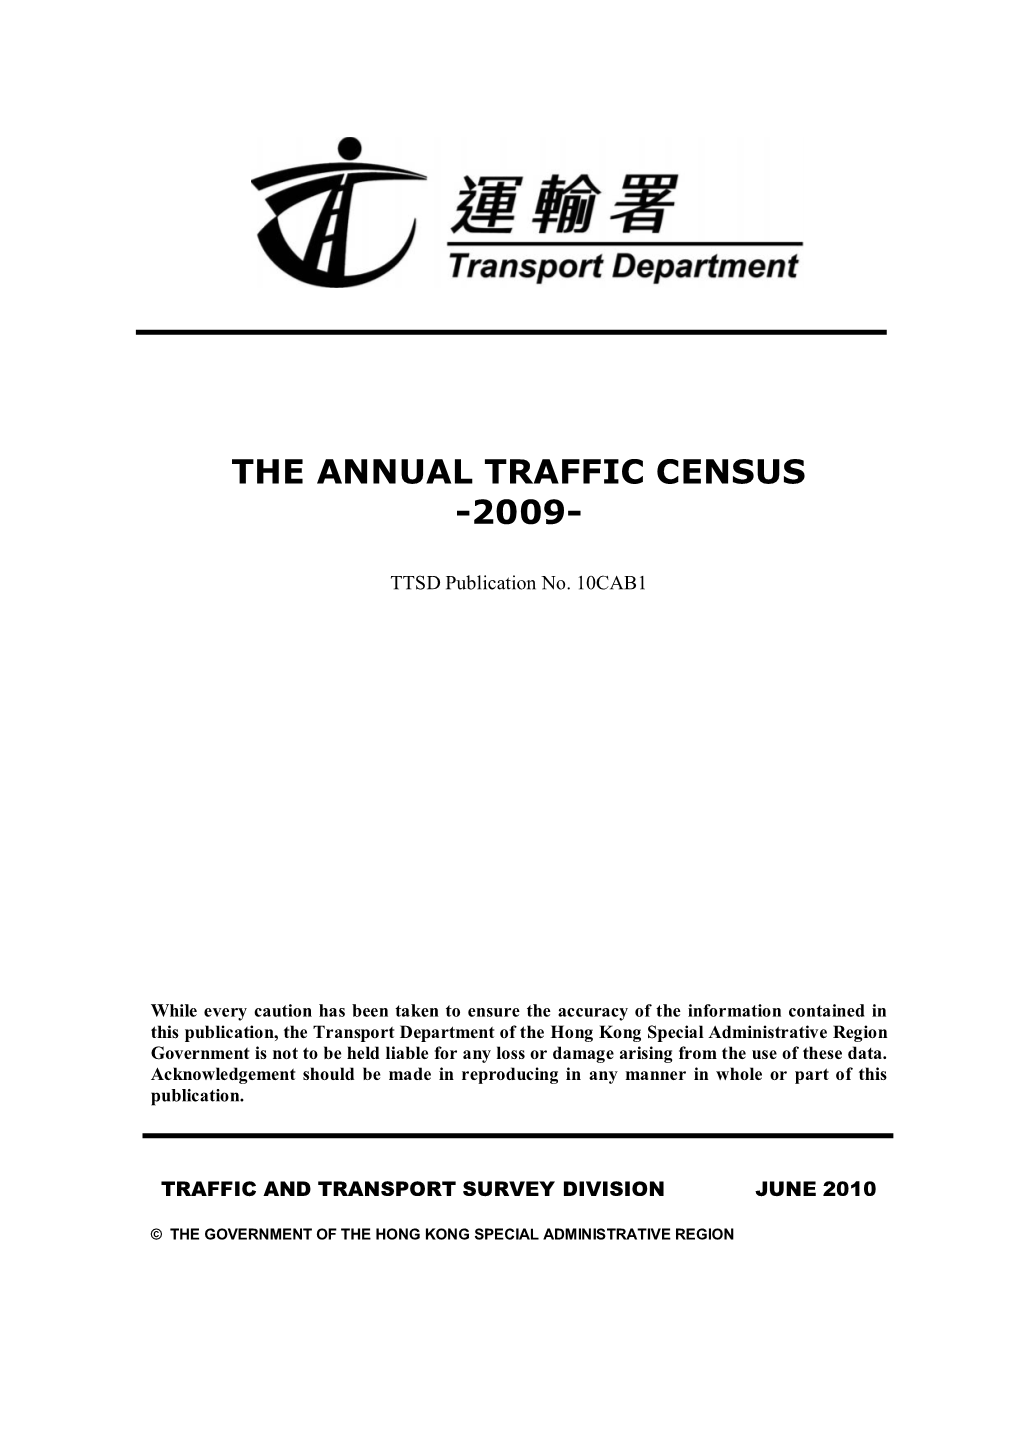 To Browse the Annual Traffic Census 2009 on the Internet